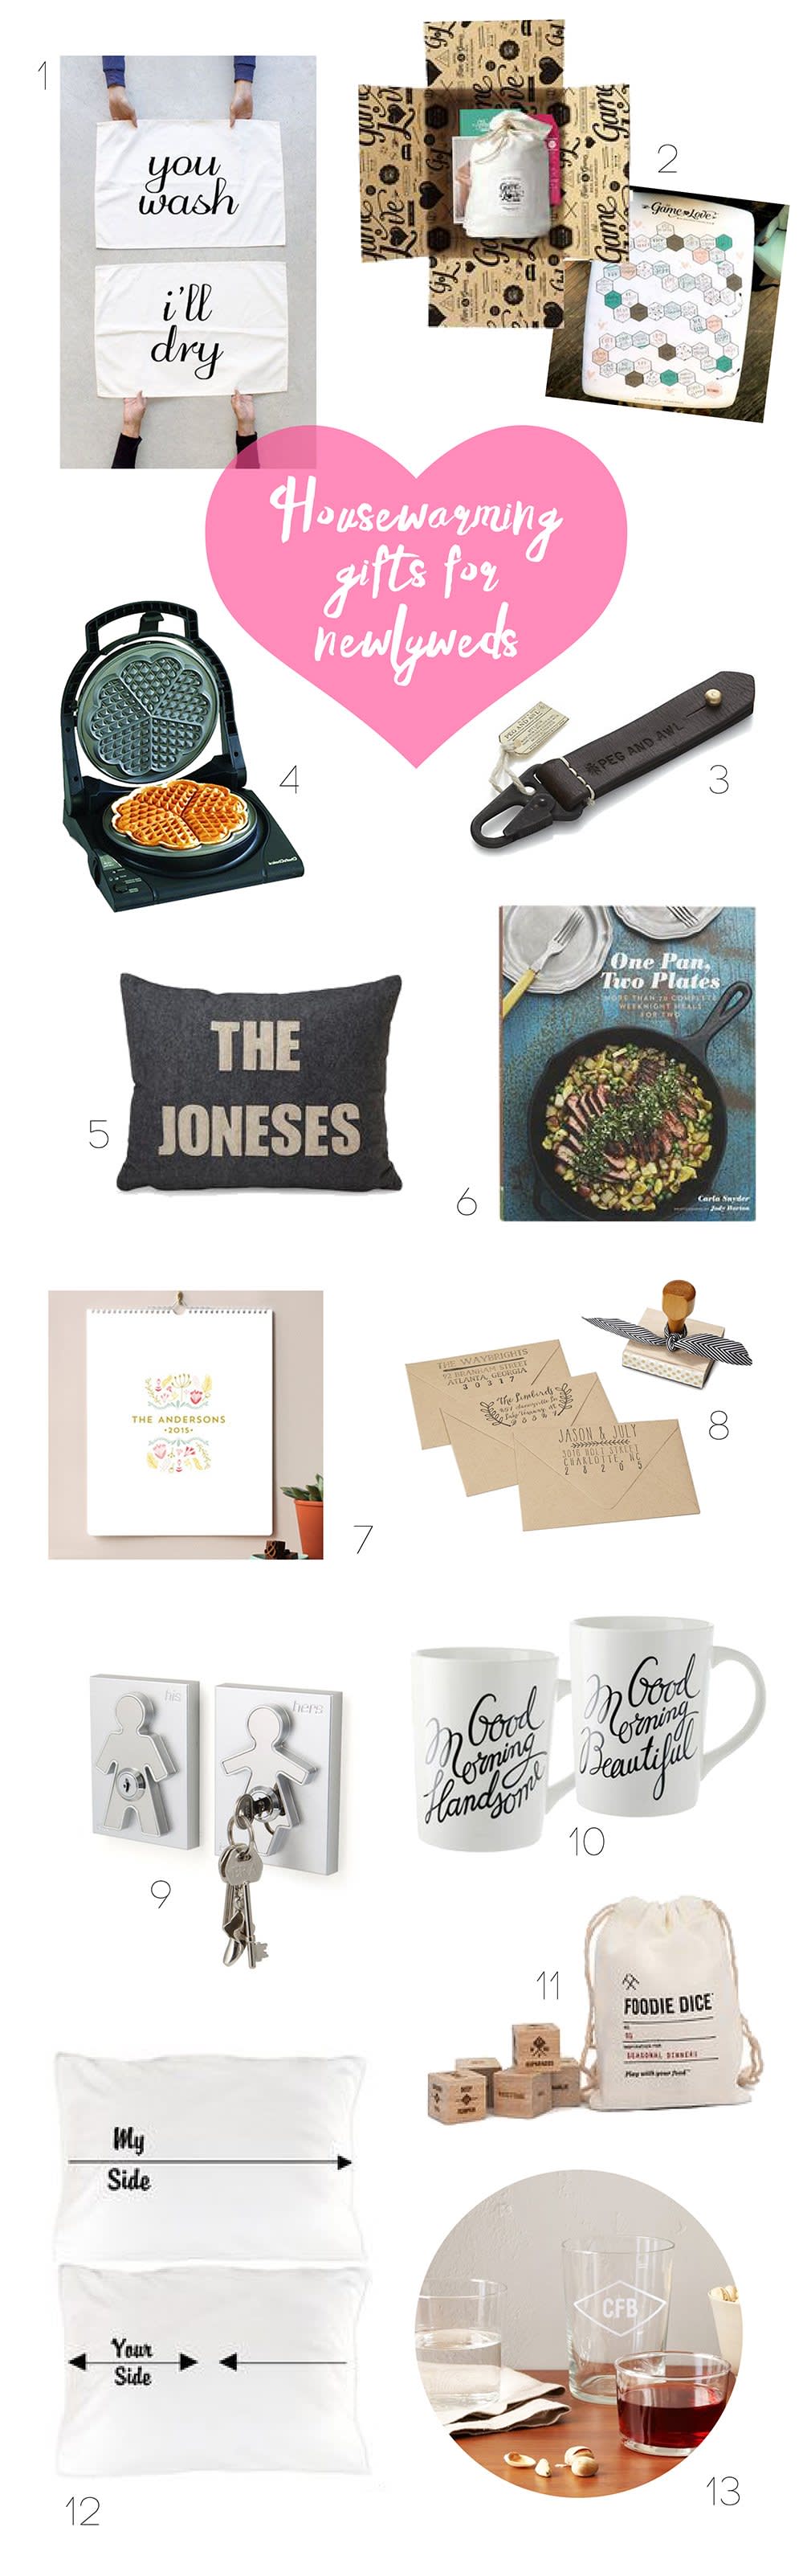 Housewarming Gifts, Gifts for Newlyweds, Gifts for Family, New